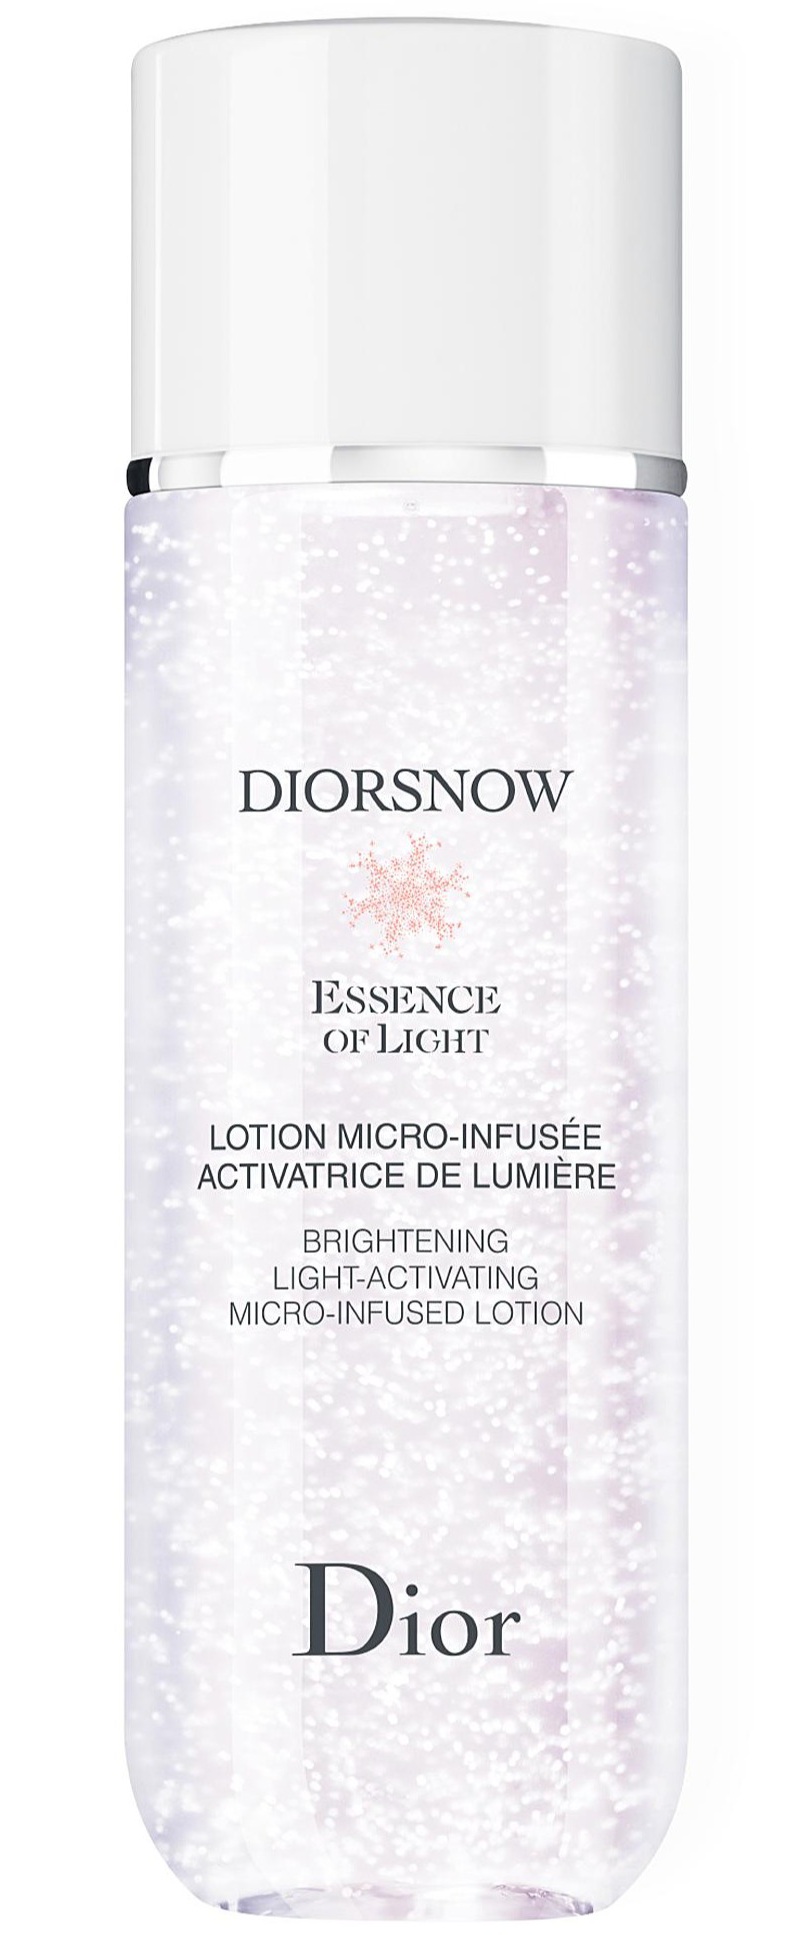 Dior Snow Essence Of Light Brightening Light-Activating Micro-Infused Lotion